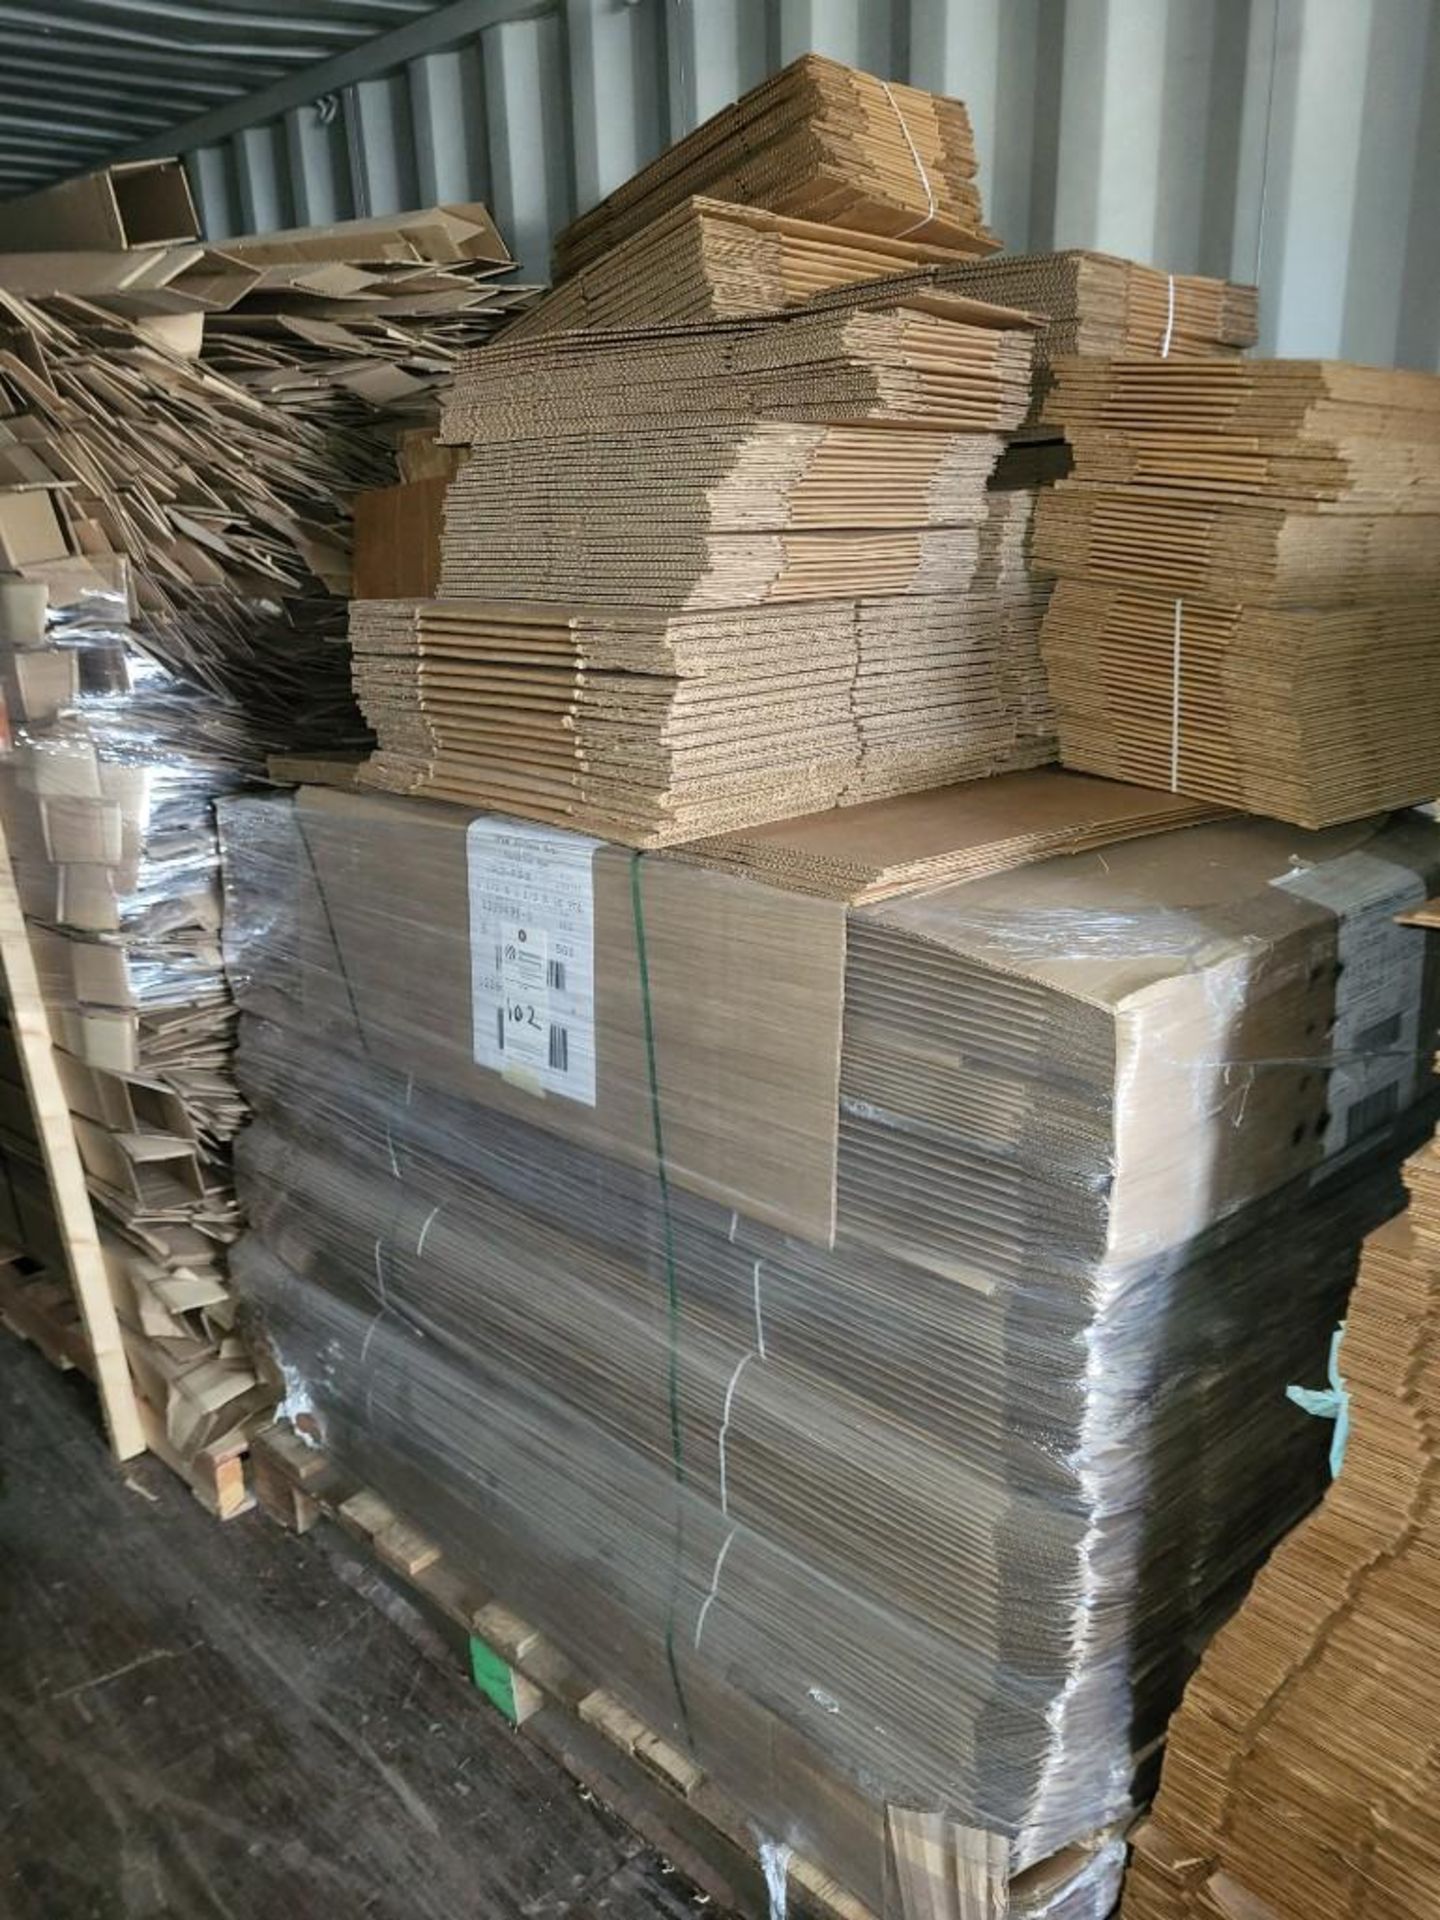 SHIPPING SUPPLIES - ASSORTED CARDBOARD BOXES